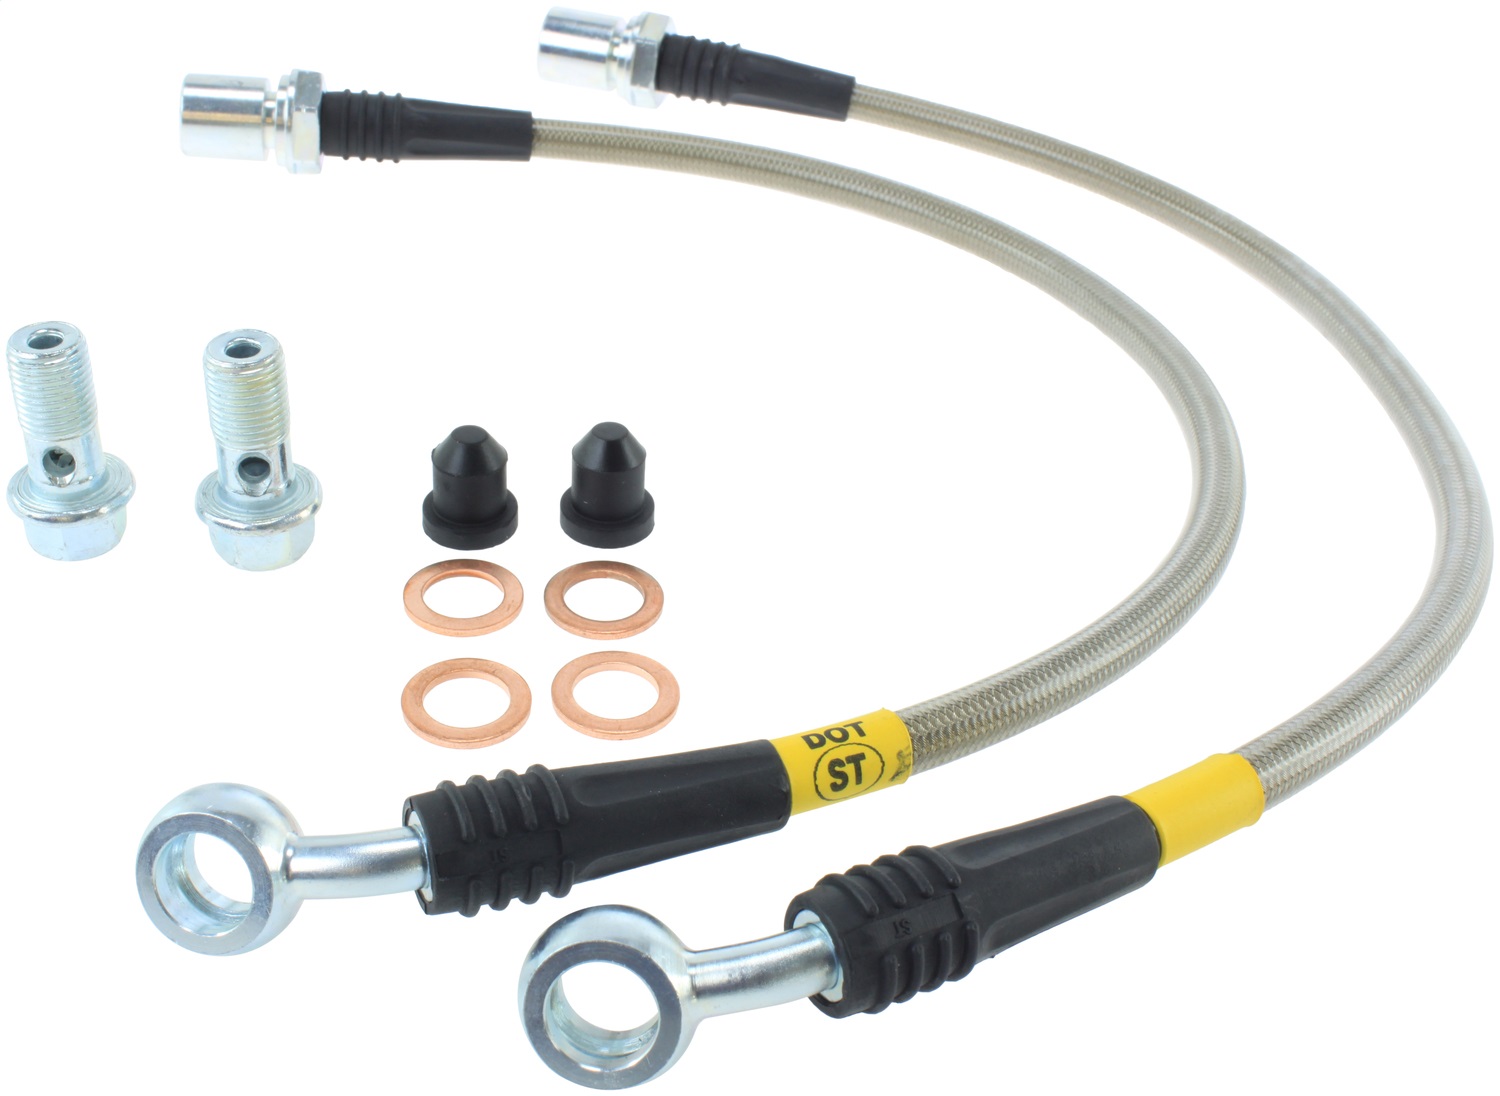 StopTech 950.44502 Stainless Steel Hose Set Fits 95-06 LS400 LS430